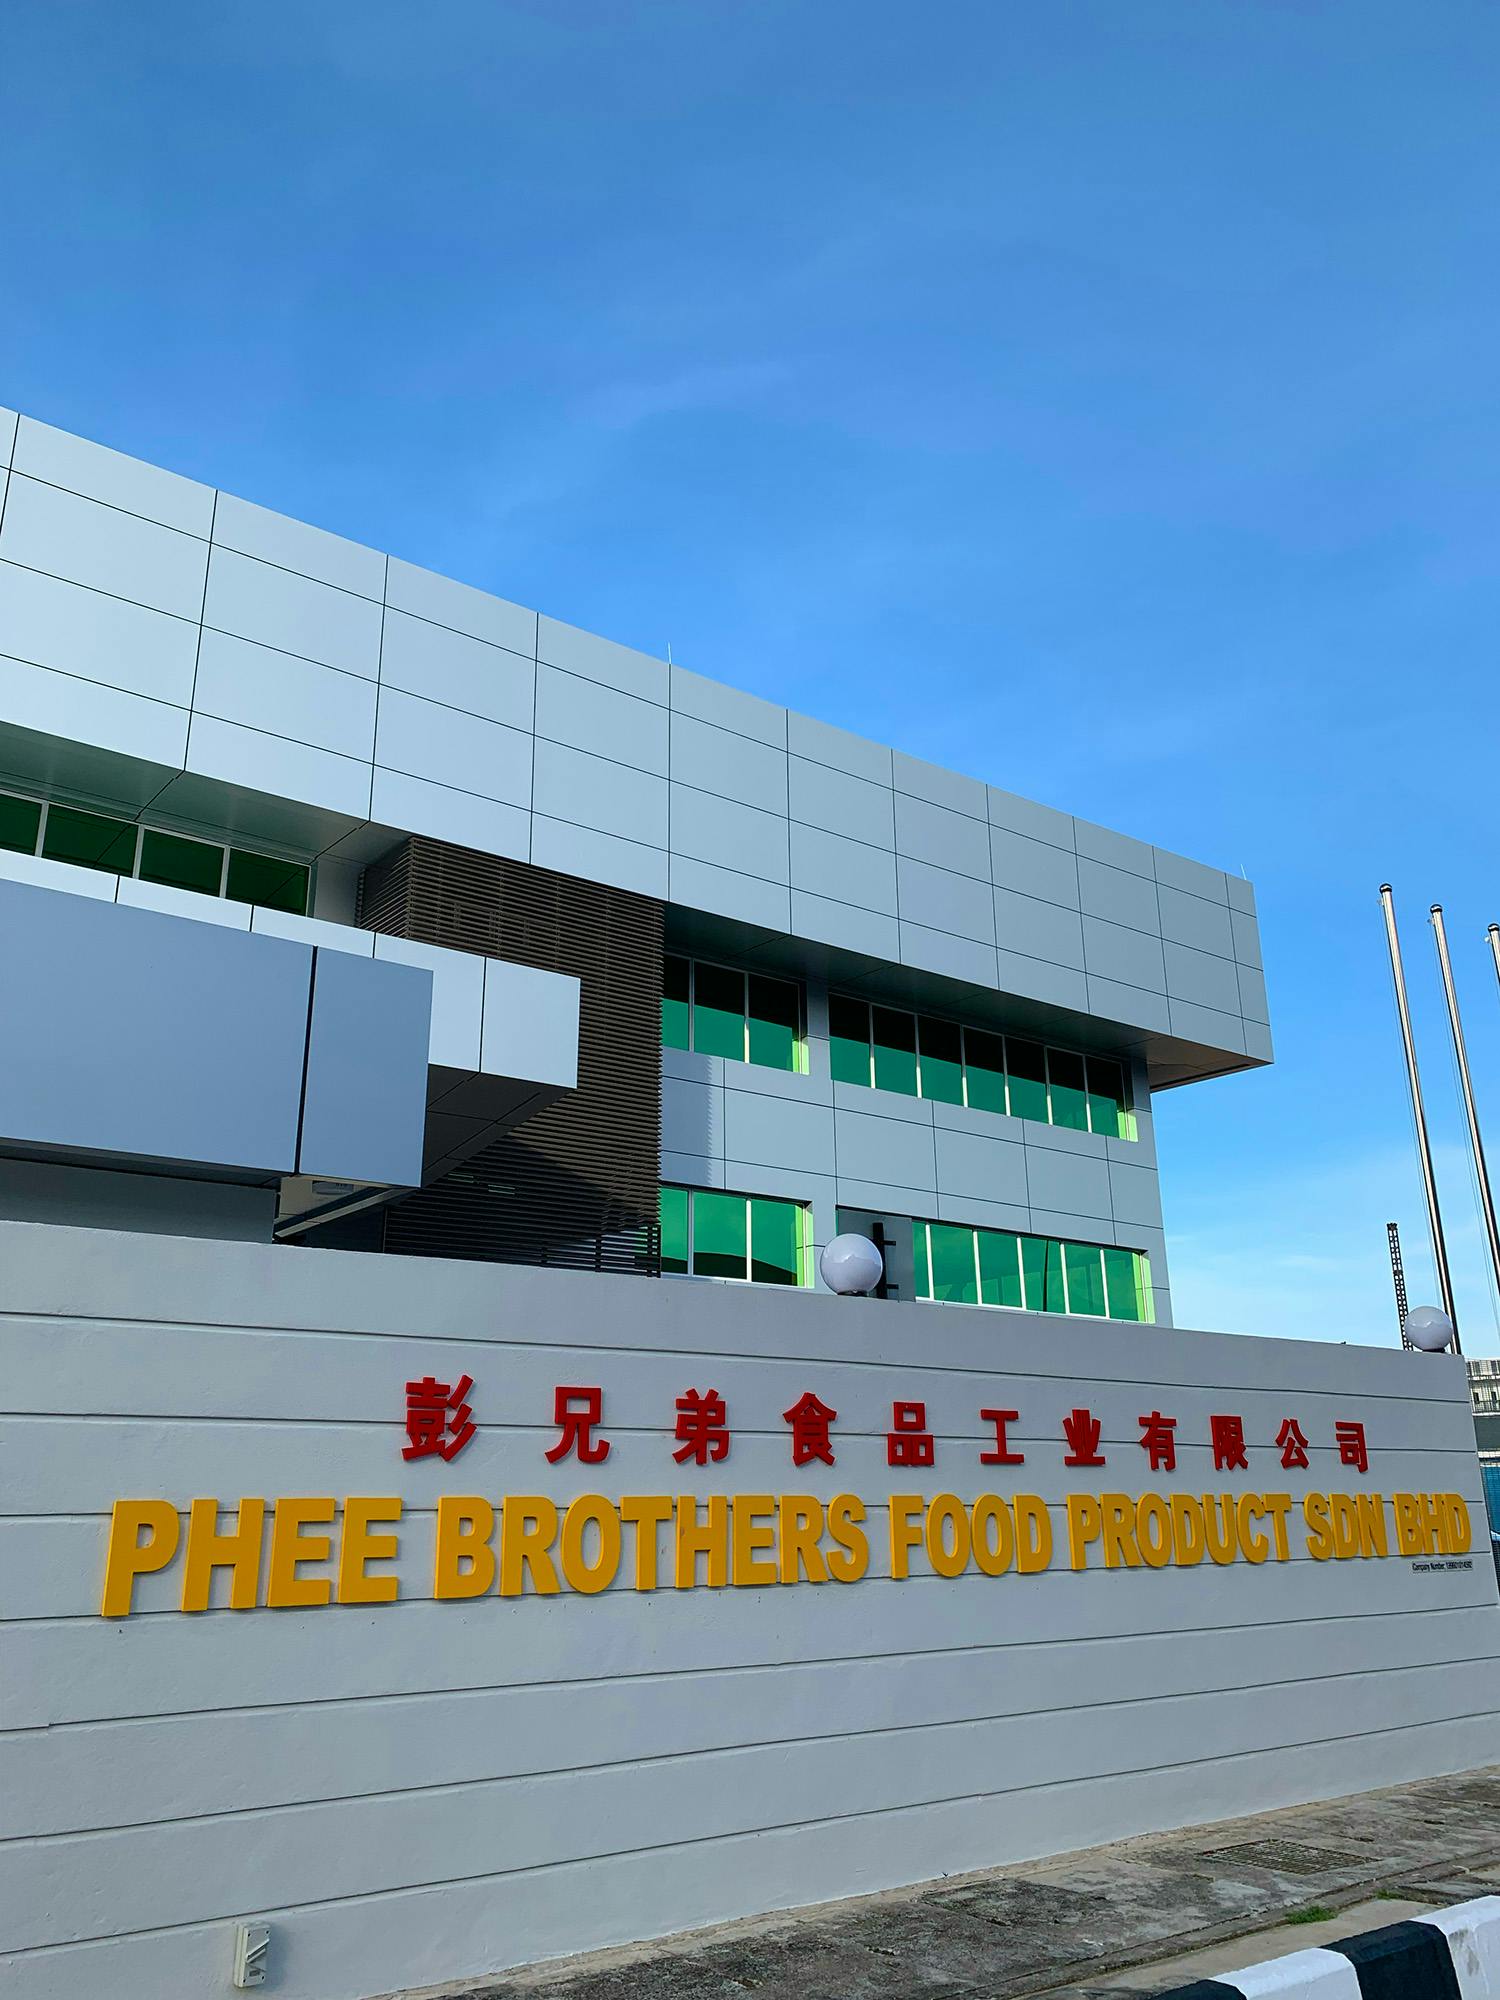 Phee Brothers Food Product Sdn Bhd